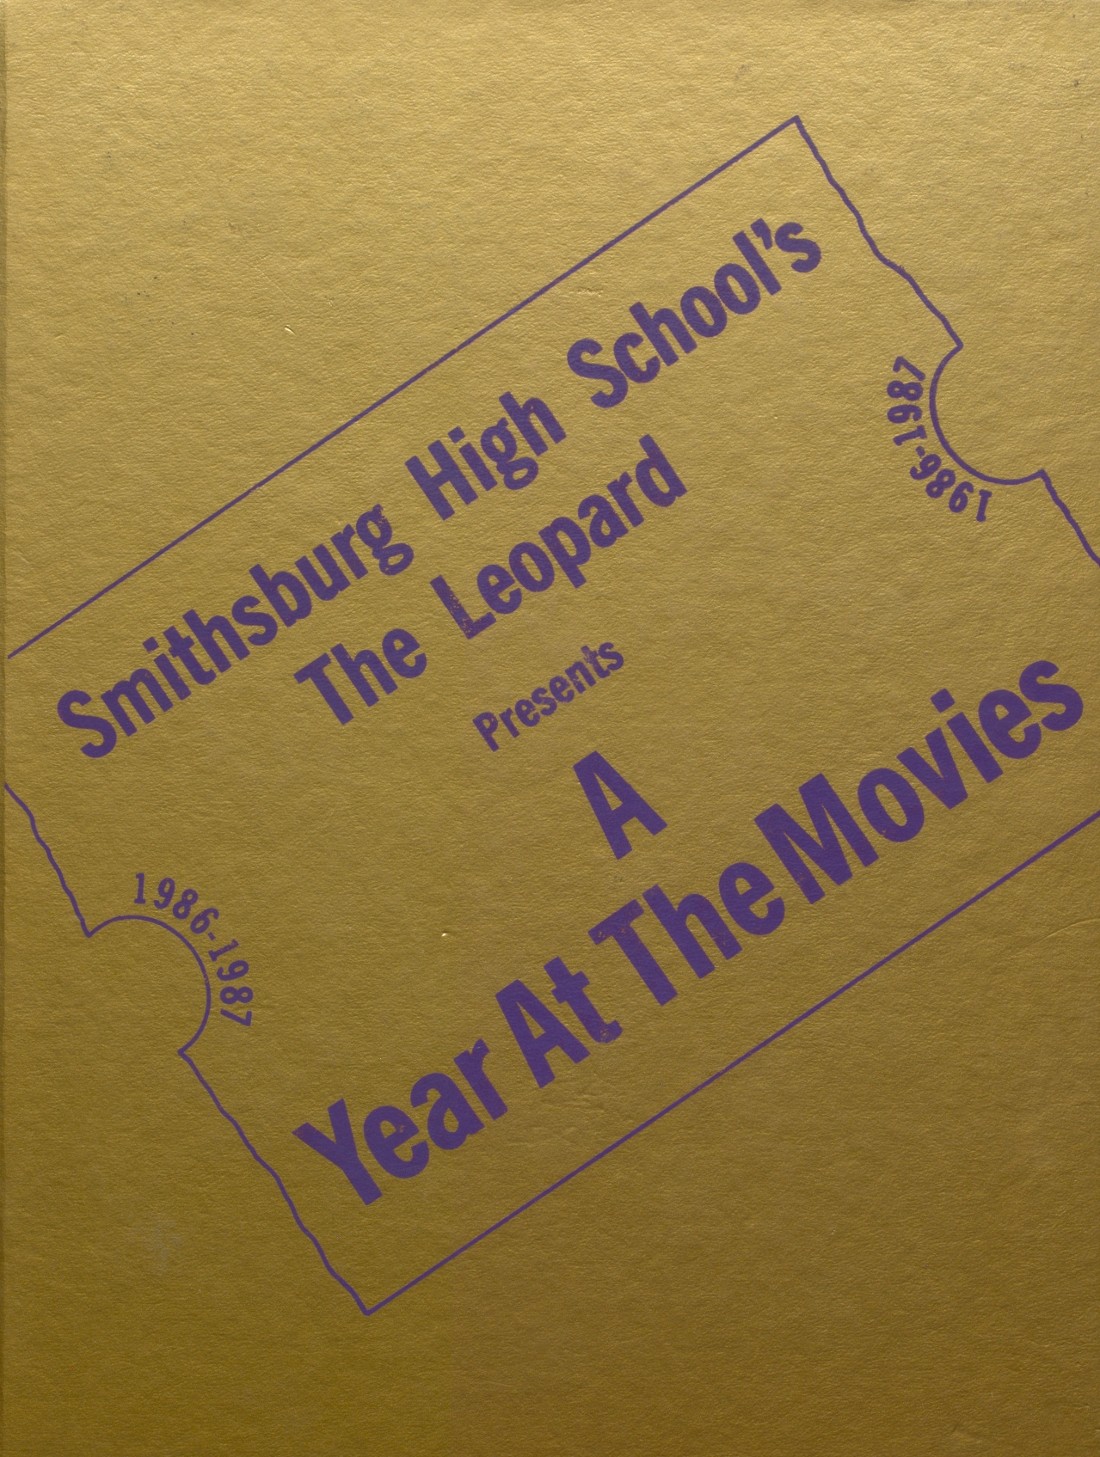 1987 yearbook from Smithsburg High School from Smithsburg, Maryland for